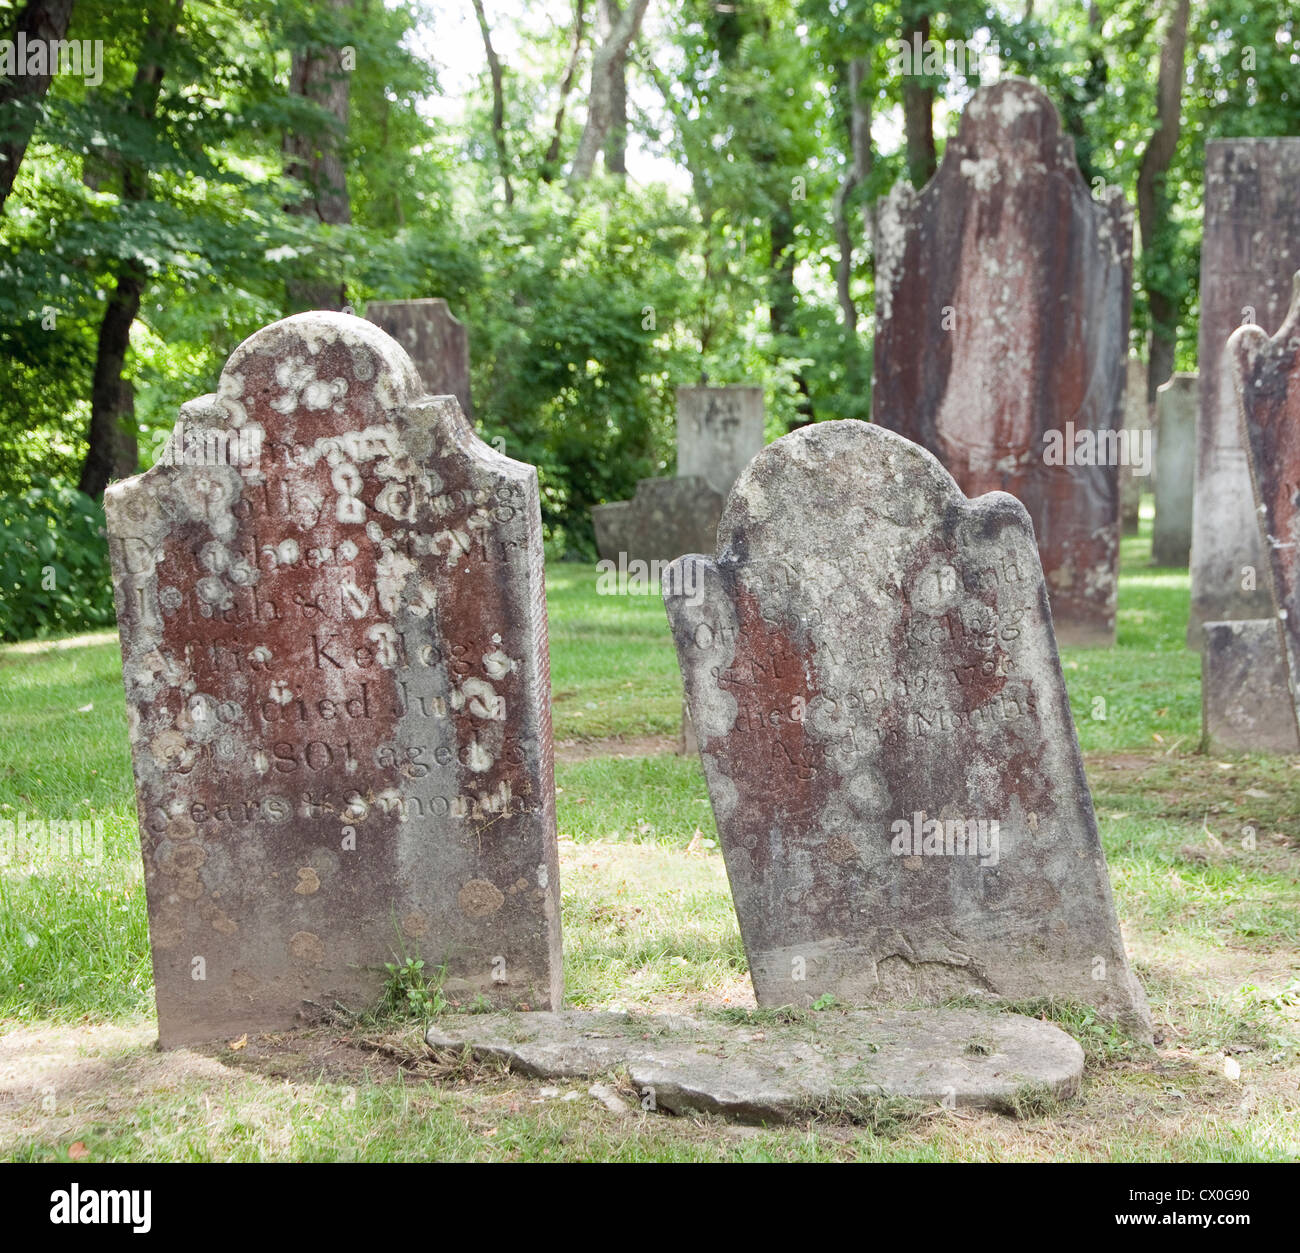 Gravestone erosion in an old cemetery. Stock Photo